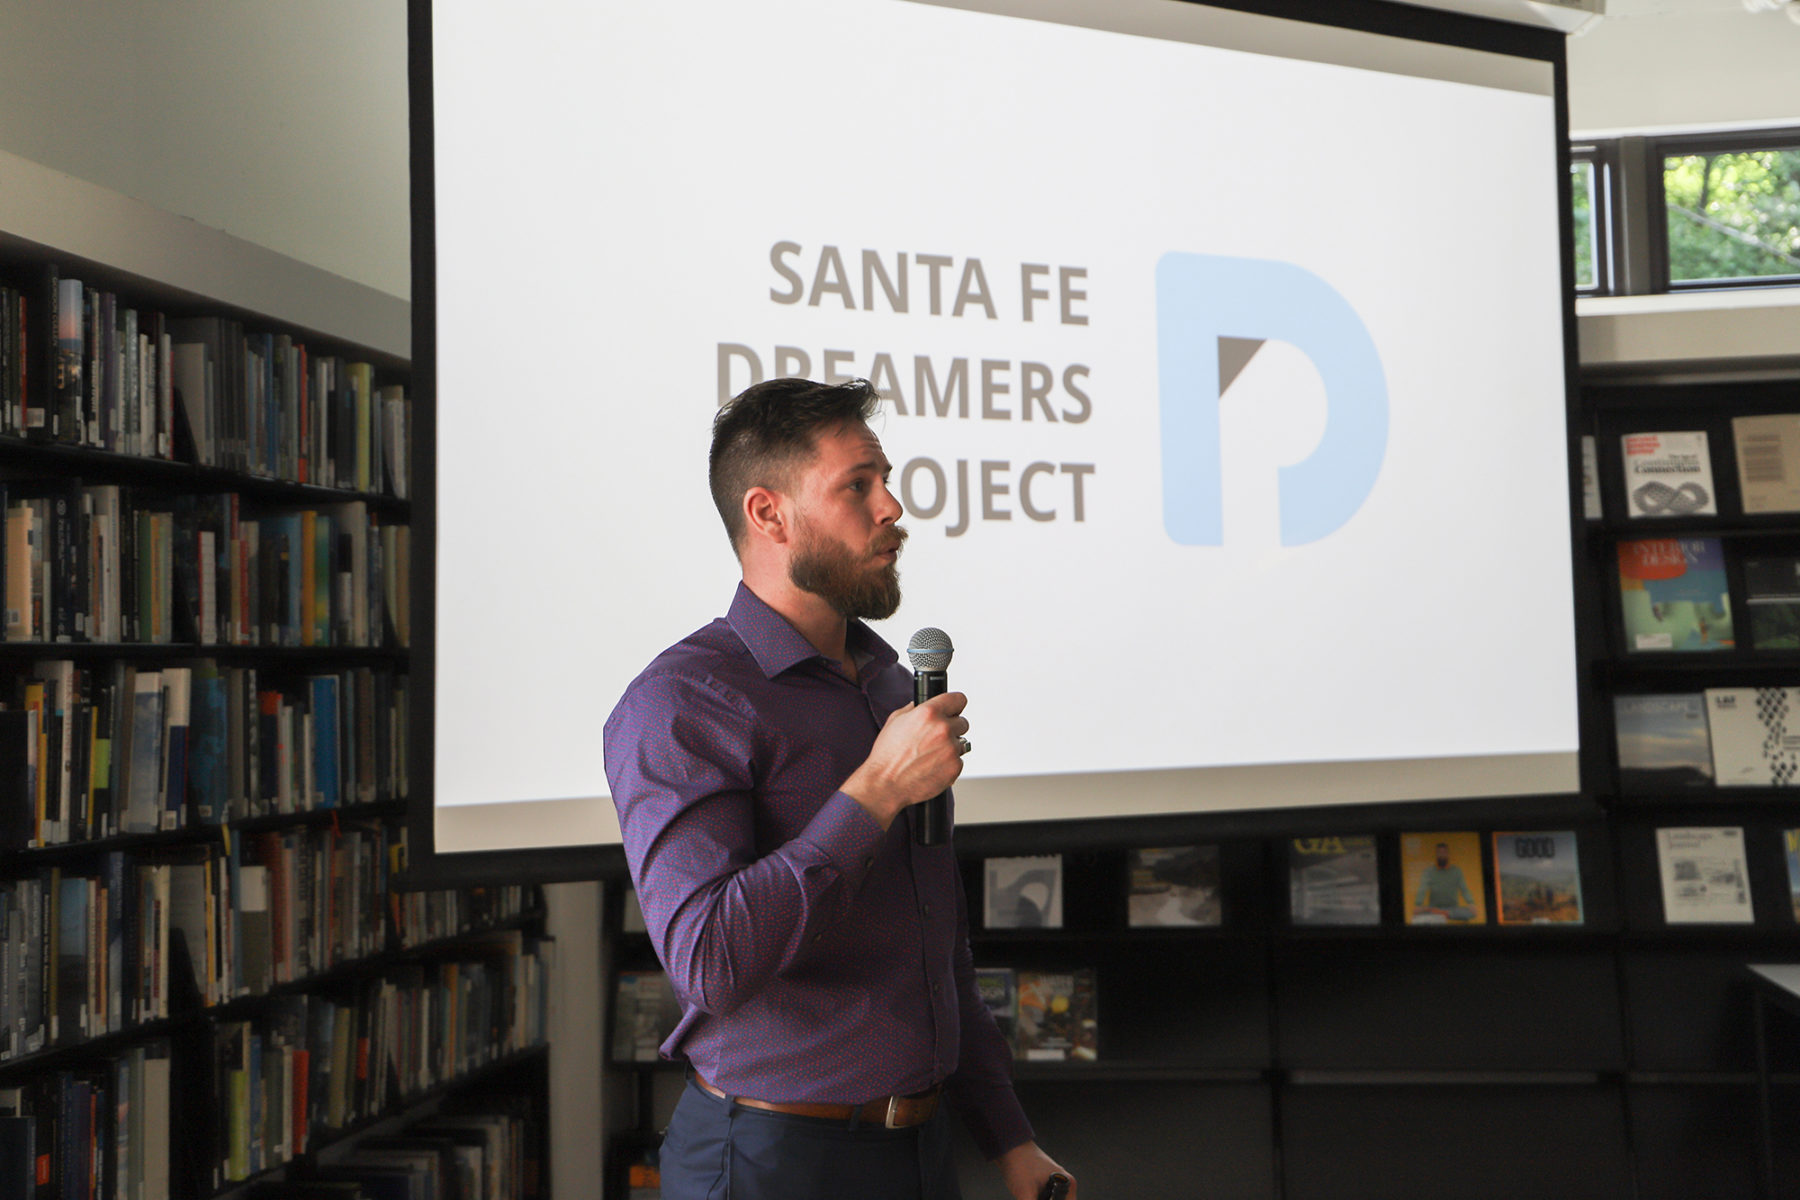 Man speaking to group in front of screen with Santa Fe Dreamers Project logo